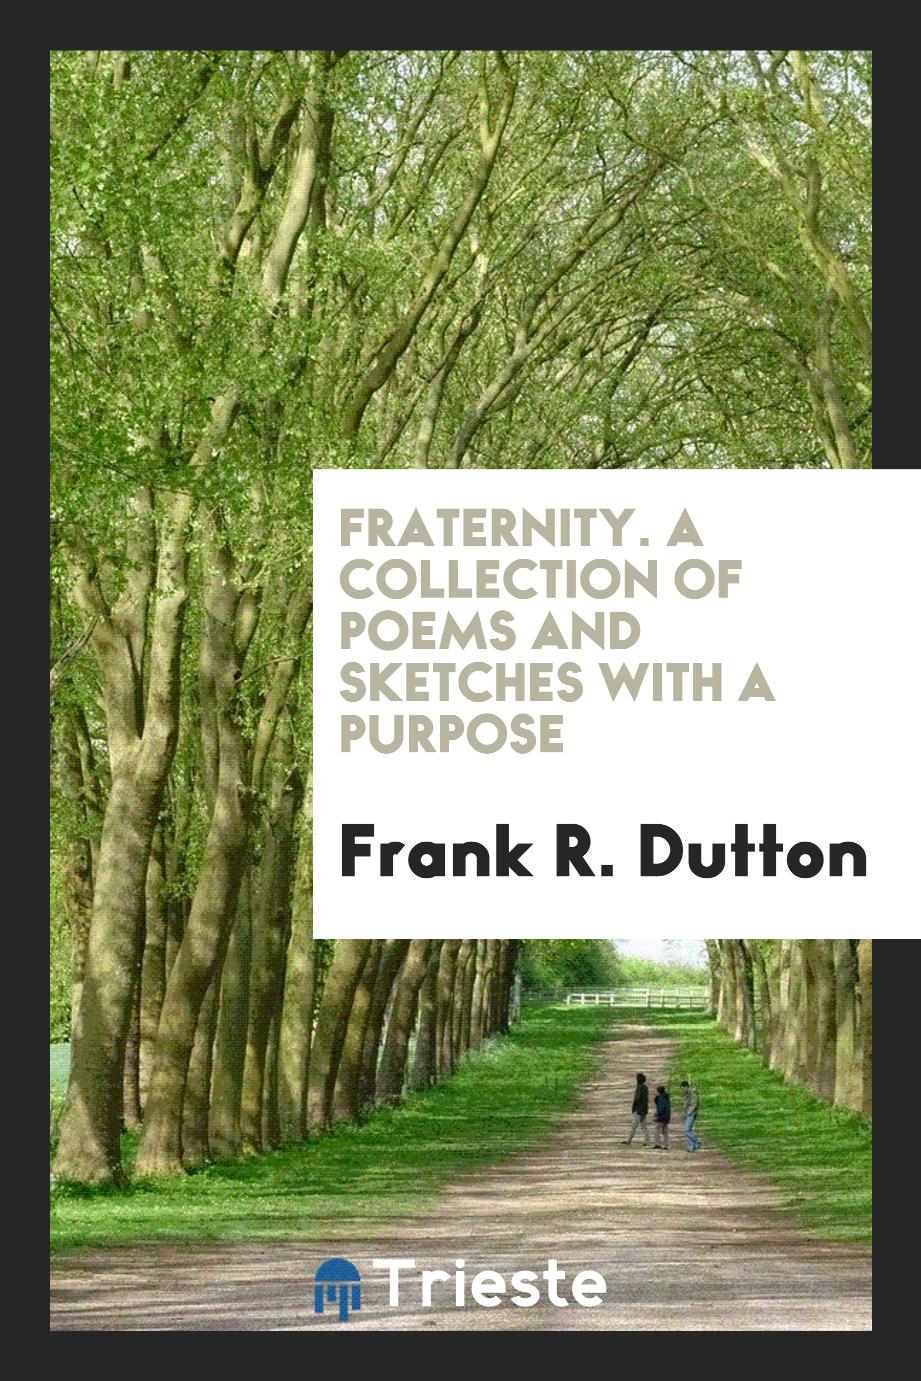 Fraternity. A Collection of Poems and Sketches with a Purpose